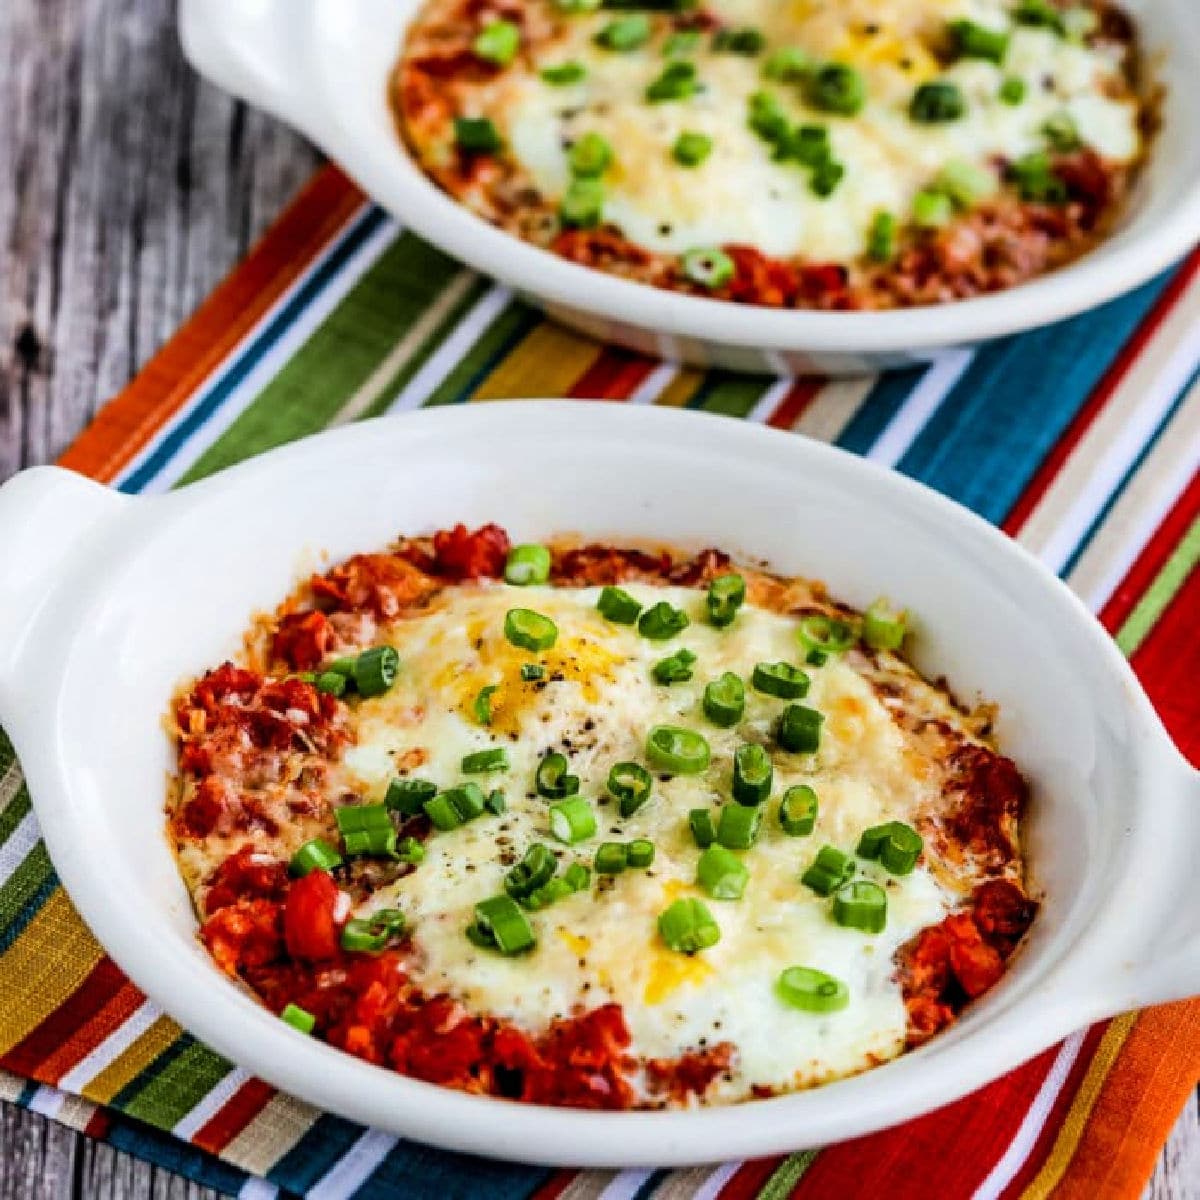 Square image for Tuscan Baked Eggs with Tomatoes shown in two gratin dishes.